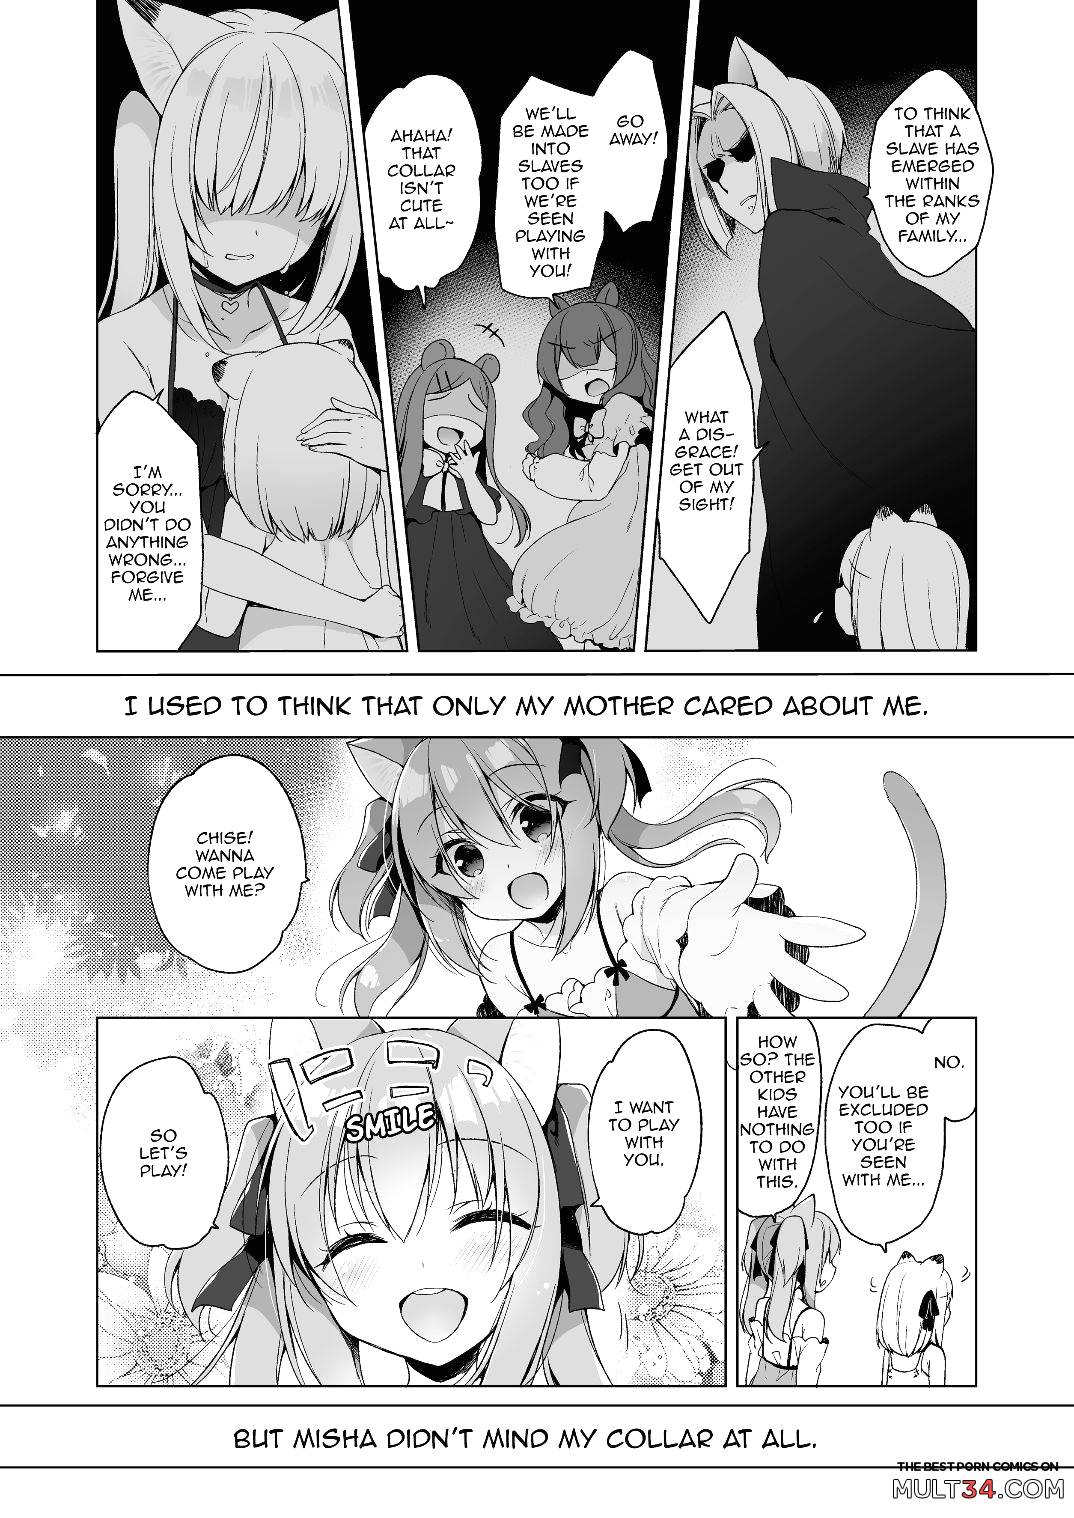 My Ideal Life in Another World Vol 4 page 28